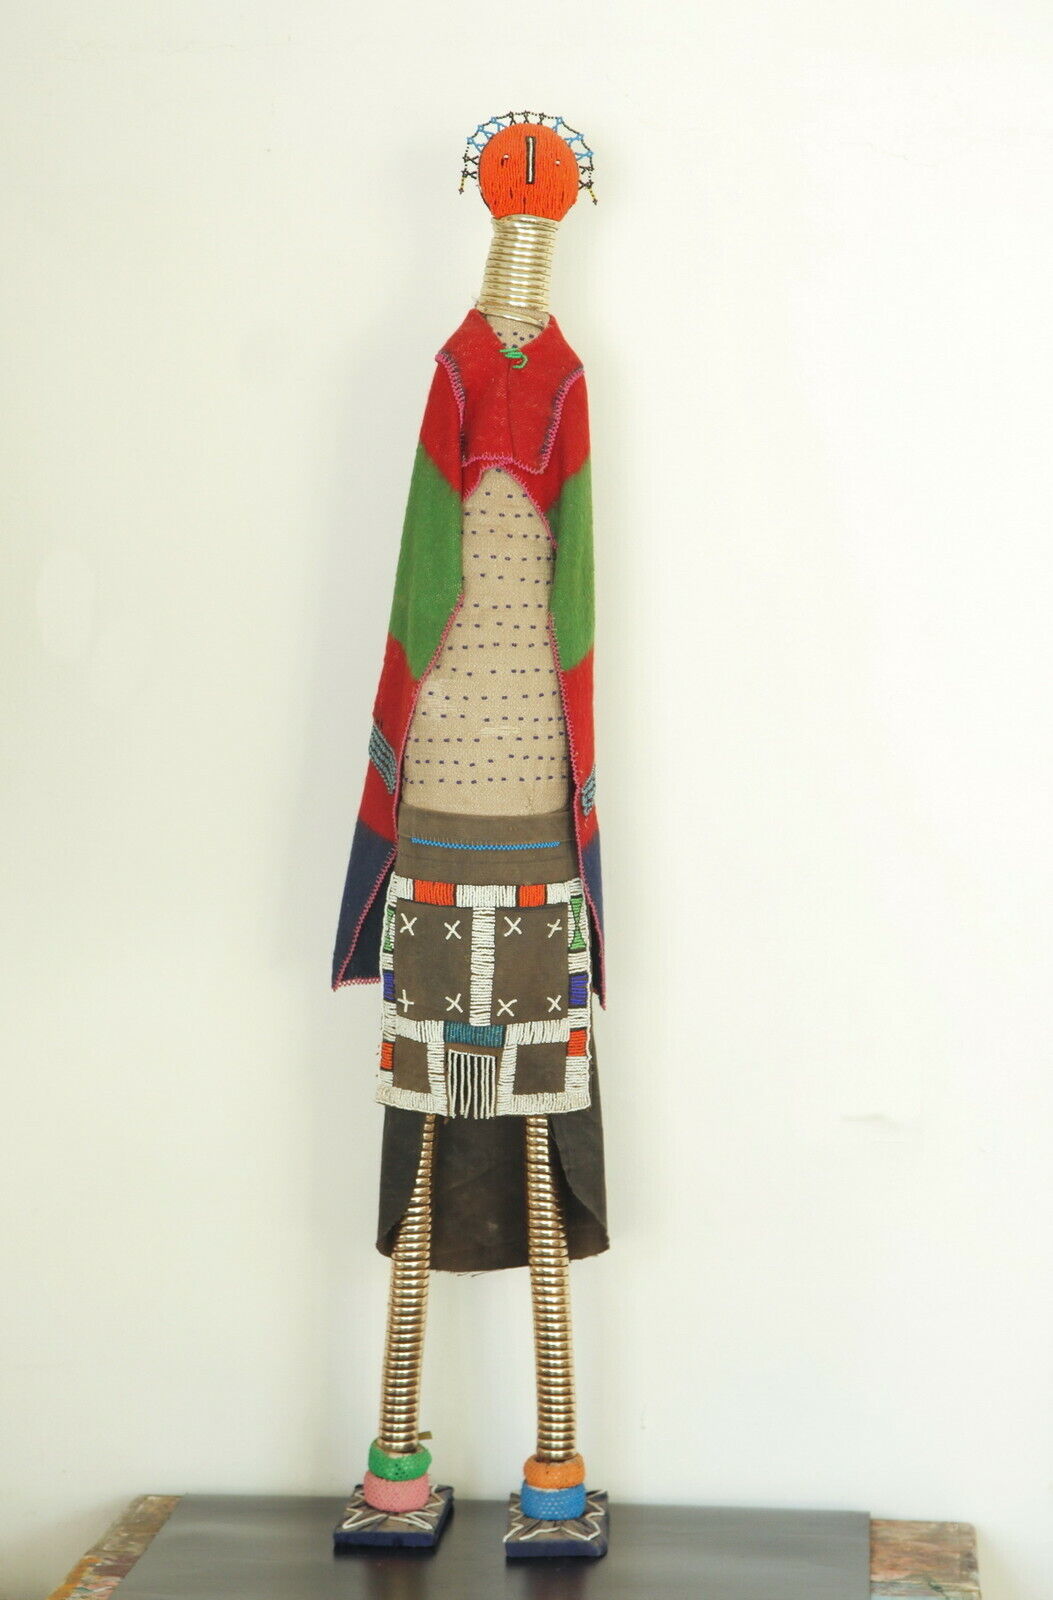 NDEBELE FERTILITY DOLL – African Tribal Rituals Fig # 1 – Height: 139cm/54.7” 